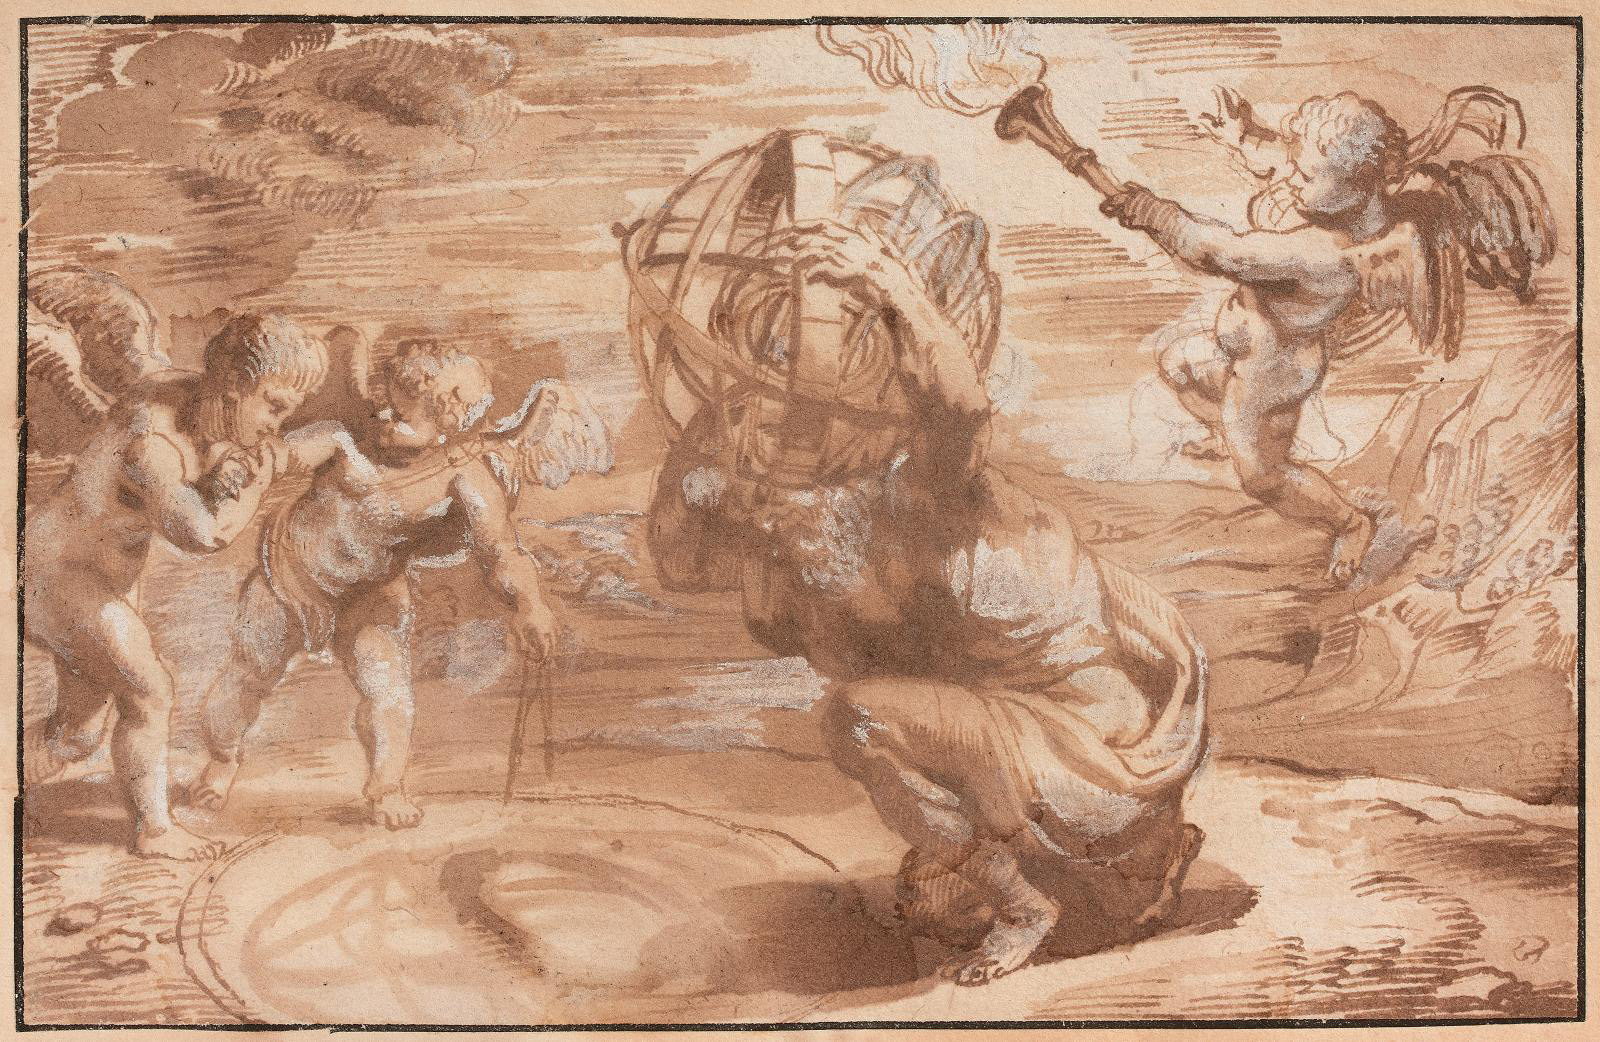 The Drawing Methods and Techniques of Peter Paul Rubens - Illustration  History